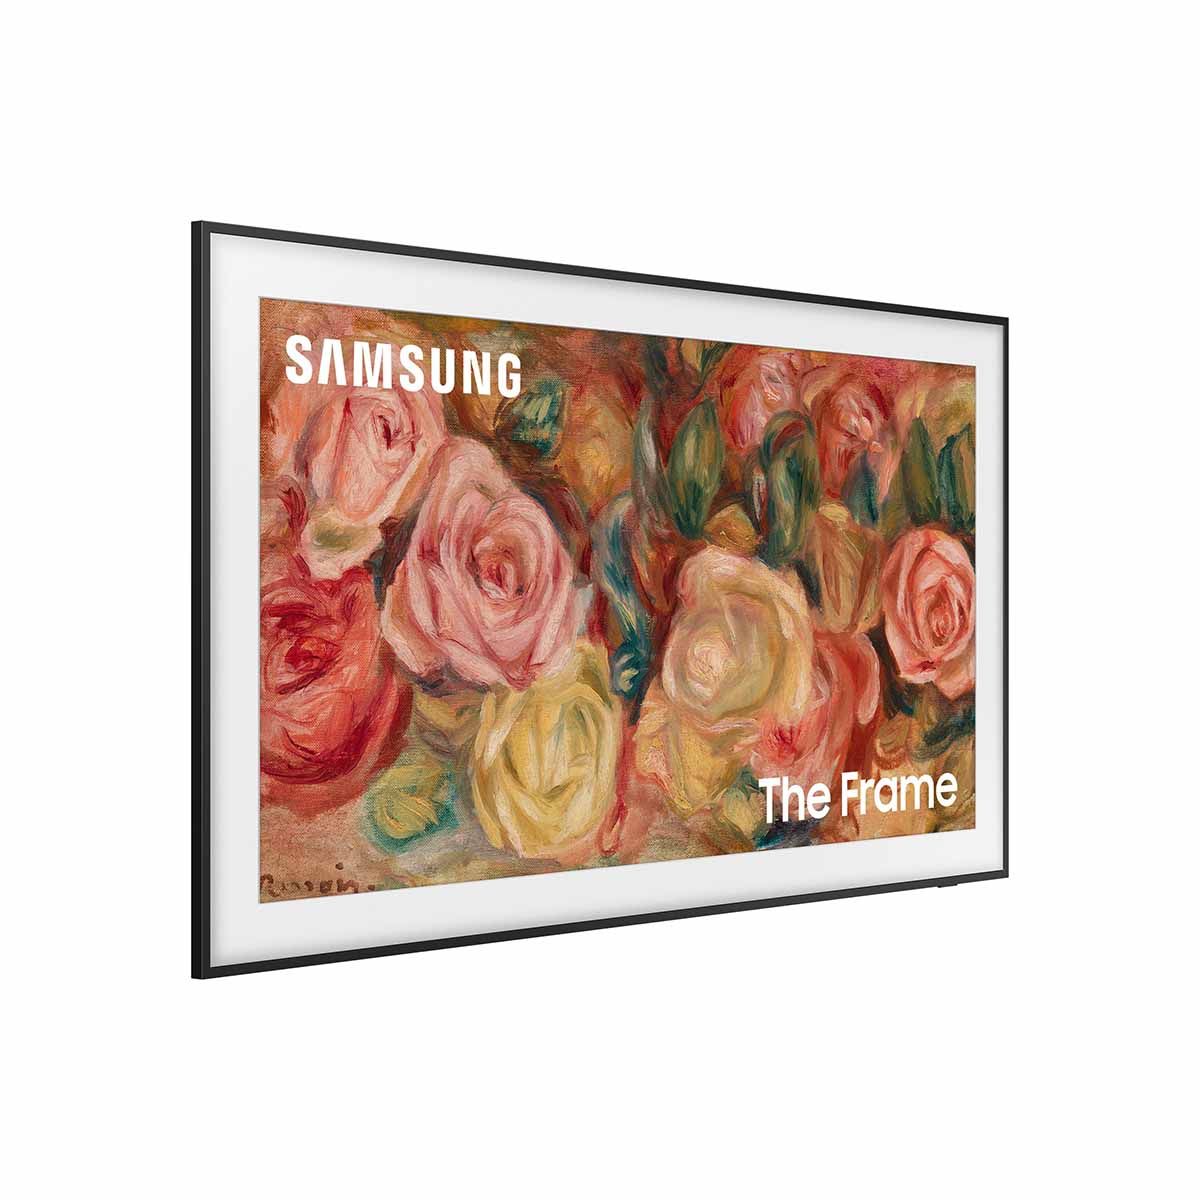 Samsung LS03D The Frame QLED HDR Smart TV - 65" no stand - angled front left view